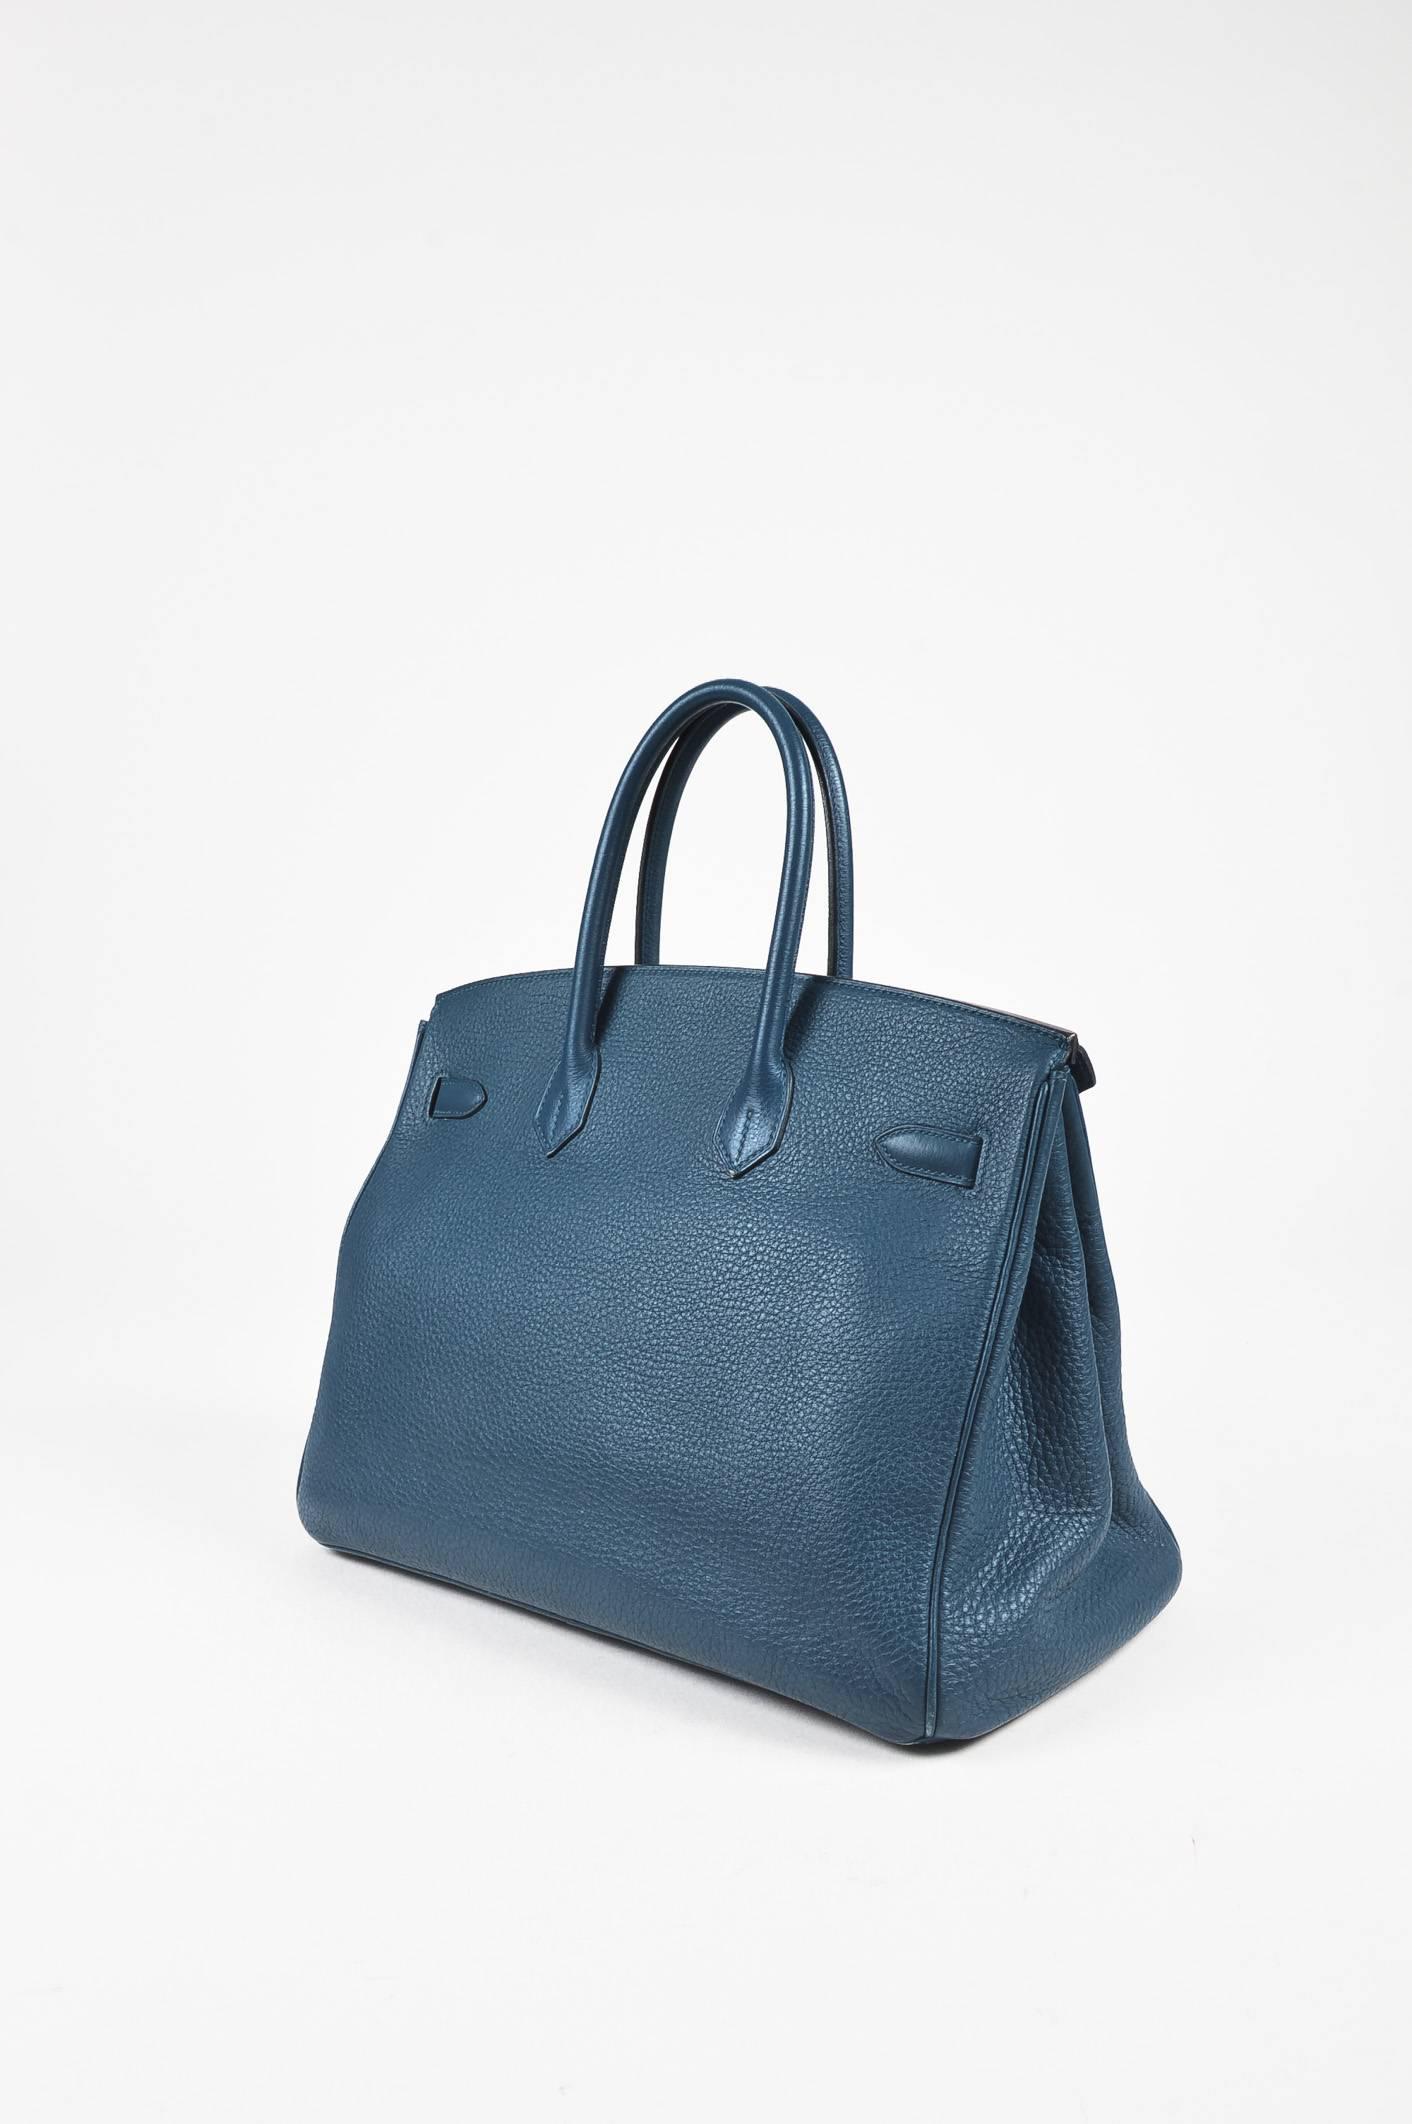 Size: 35 cm
Color: Blue,Bleu Thalassa
Style: Birkin 35
Made In: France

Fabric Content: Clemence Leather
Item Specifics & Details: One of the most recognizable pieces amongst celebrities and fashion insiders alike--this 35cm